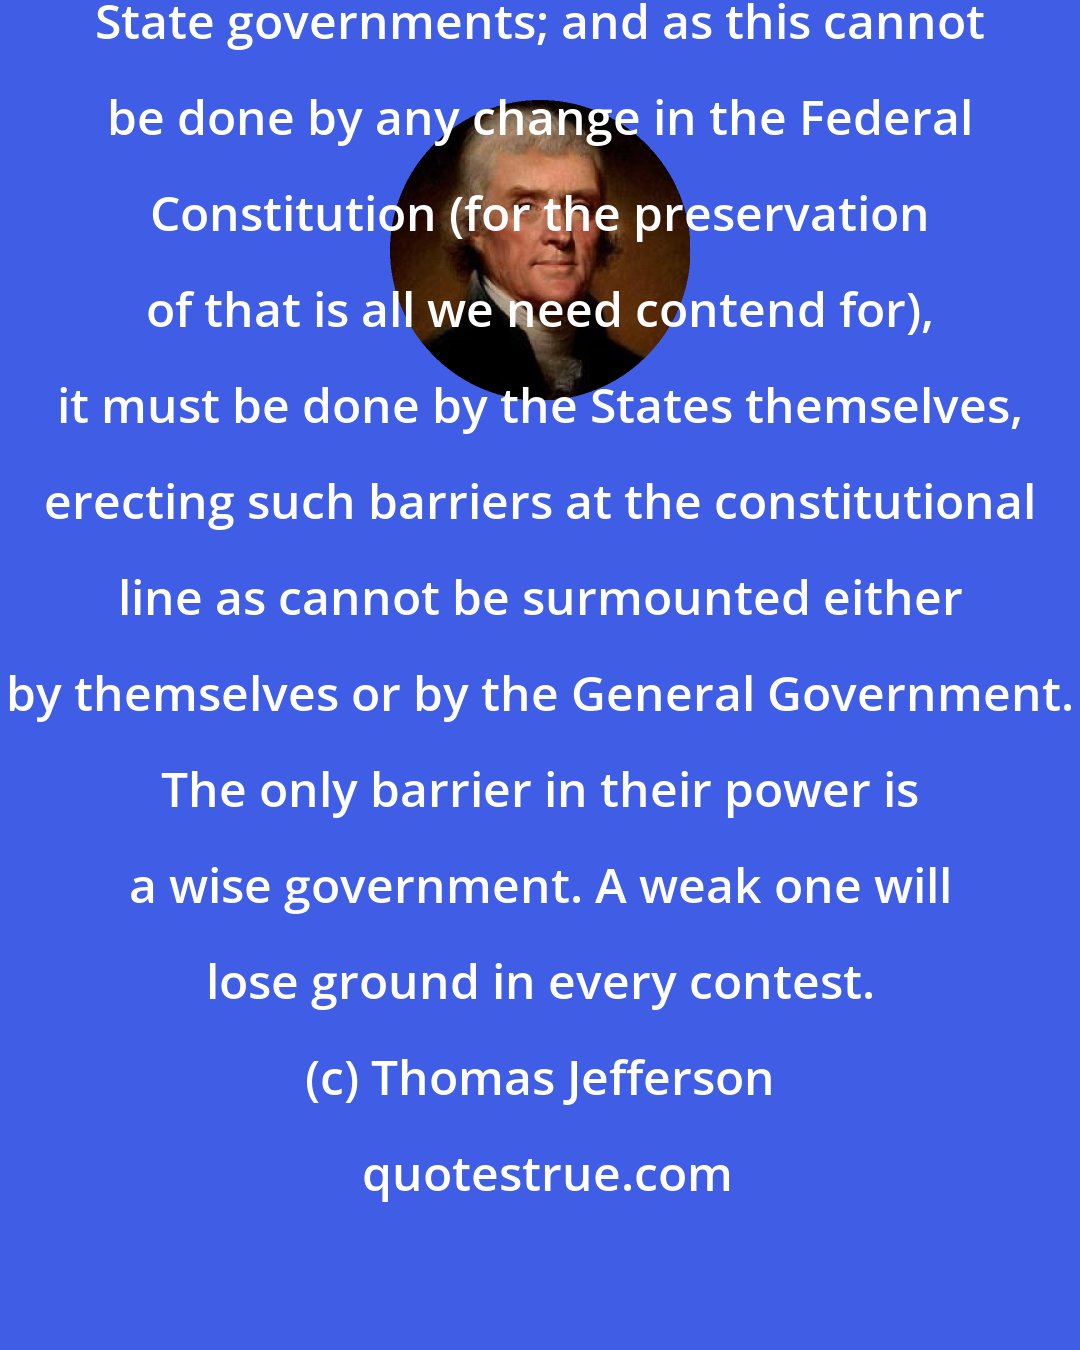 Thomas Jefferson: It is important to strengthen the State governments; and as this cannot be done by any change in the Federal Constitution (for the preservation of that is all we need contend for), it must be done by the States themselves, erecting such barriers at the constitutional line as cannot be surmounted either by themselves or by the General Government. The only barrier in their power is a wise government. A weak one will lose ground in every contest.